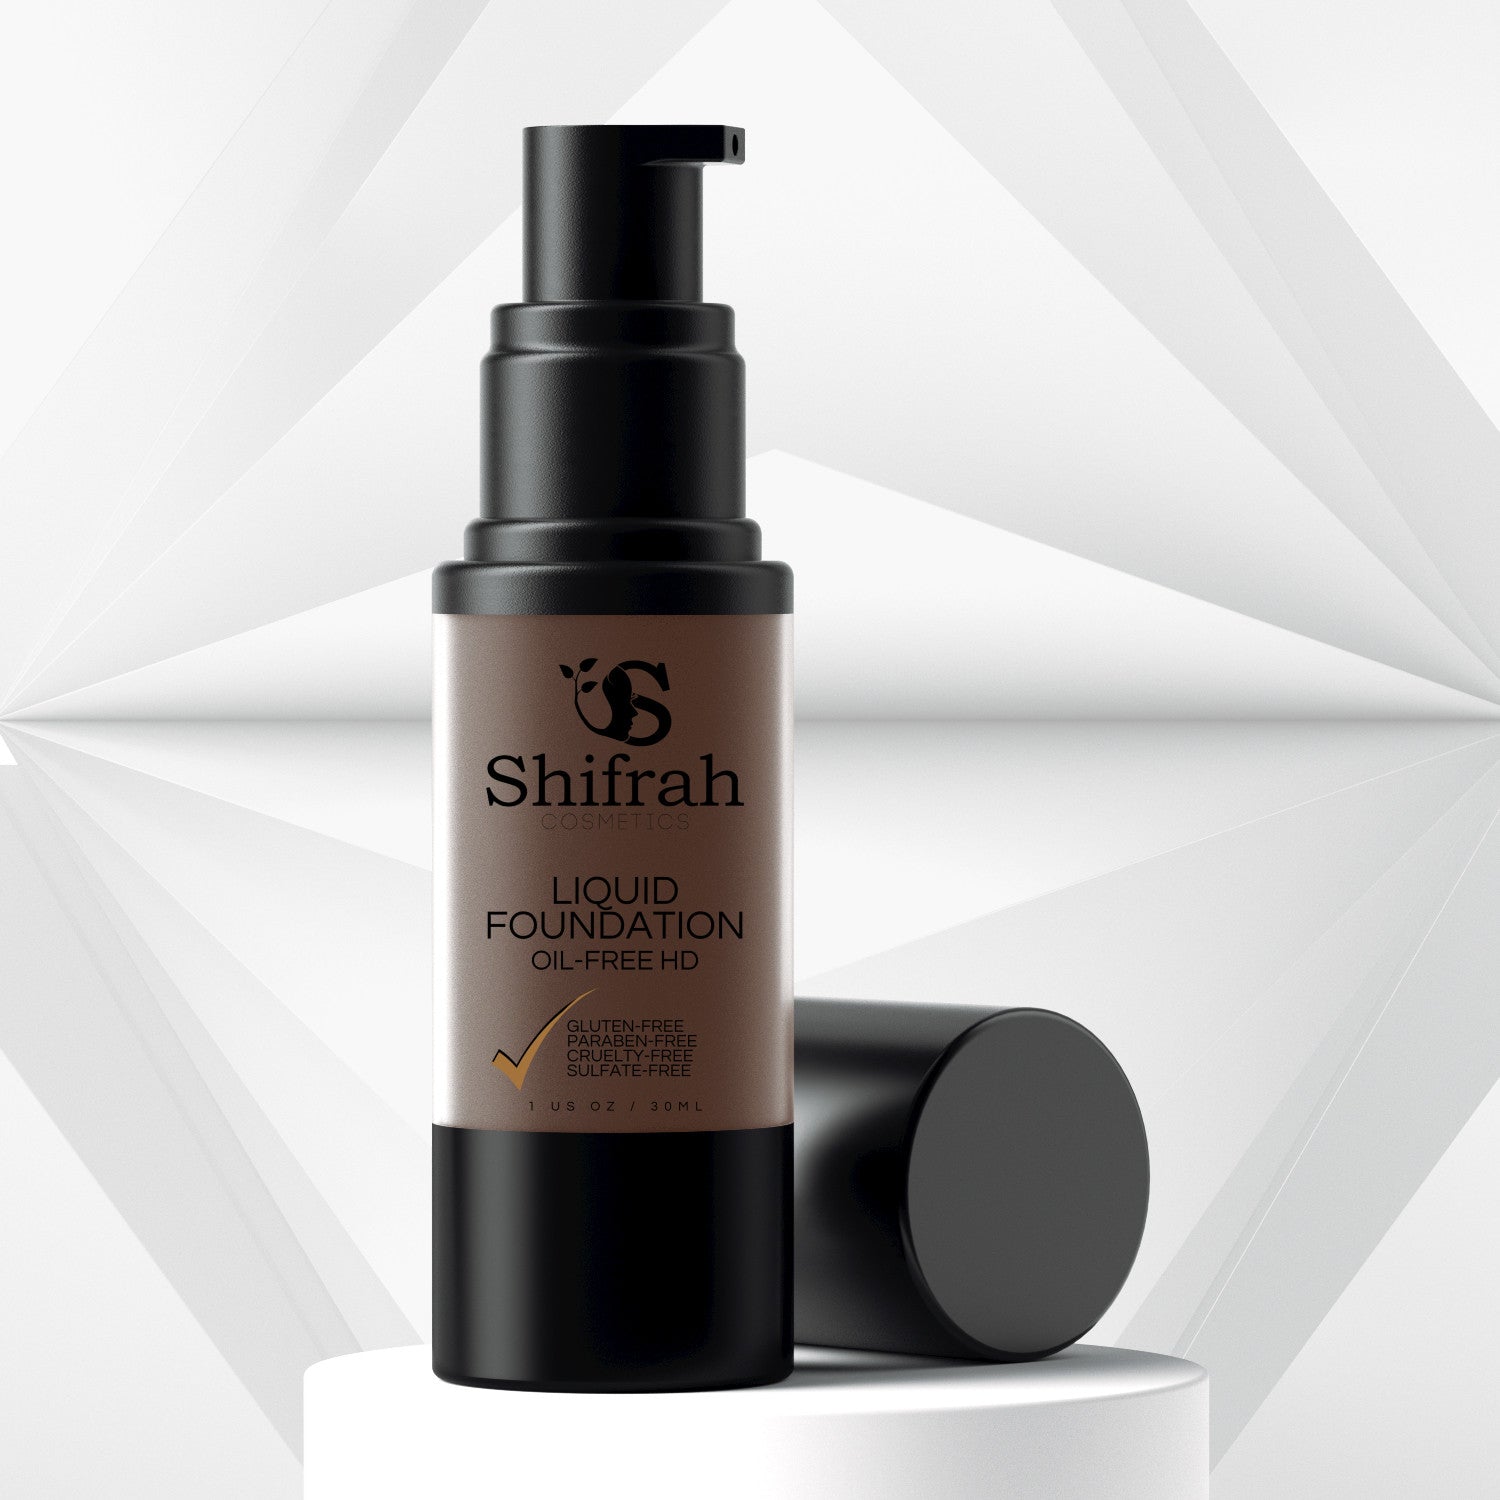 paraben-free cruelty-free oil-free liquid foundation concealer cocoa